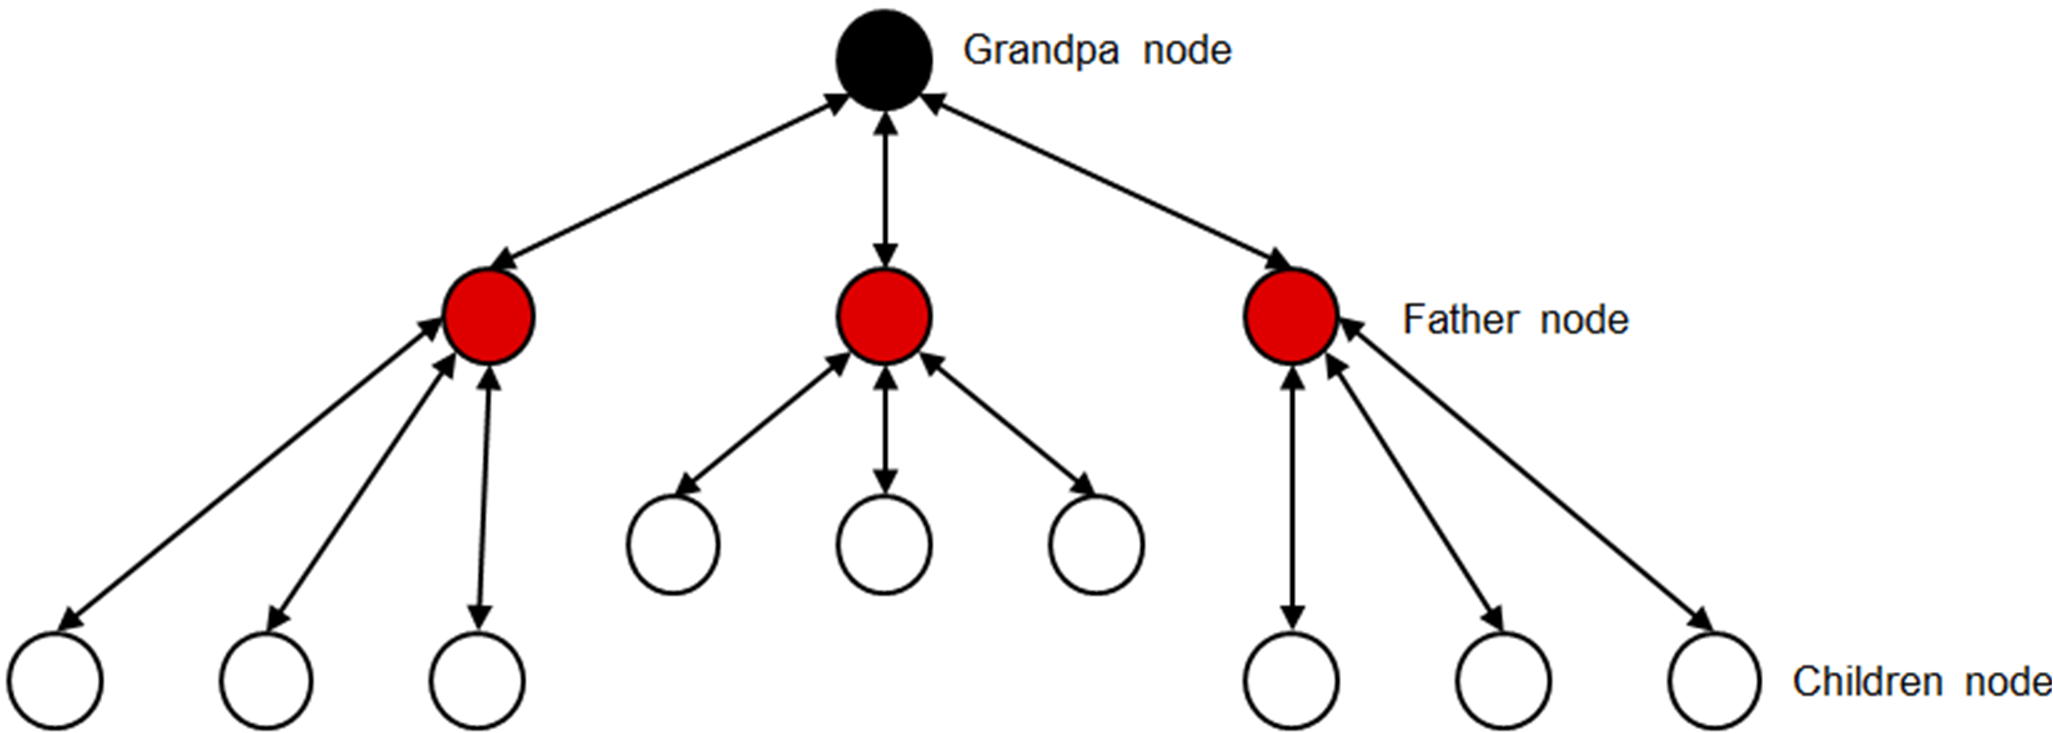 tree-structure-network.png